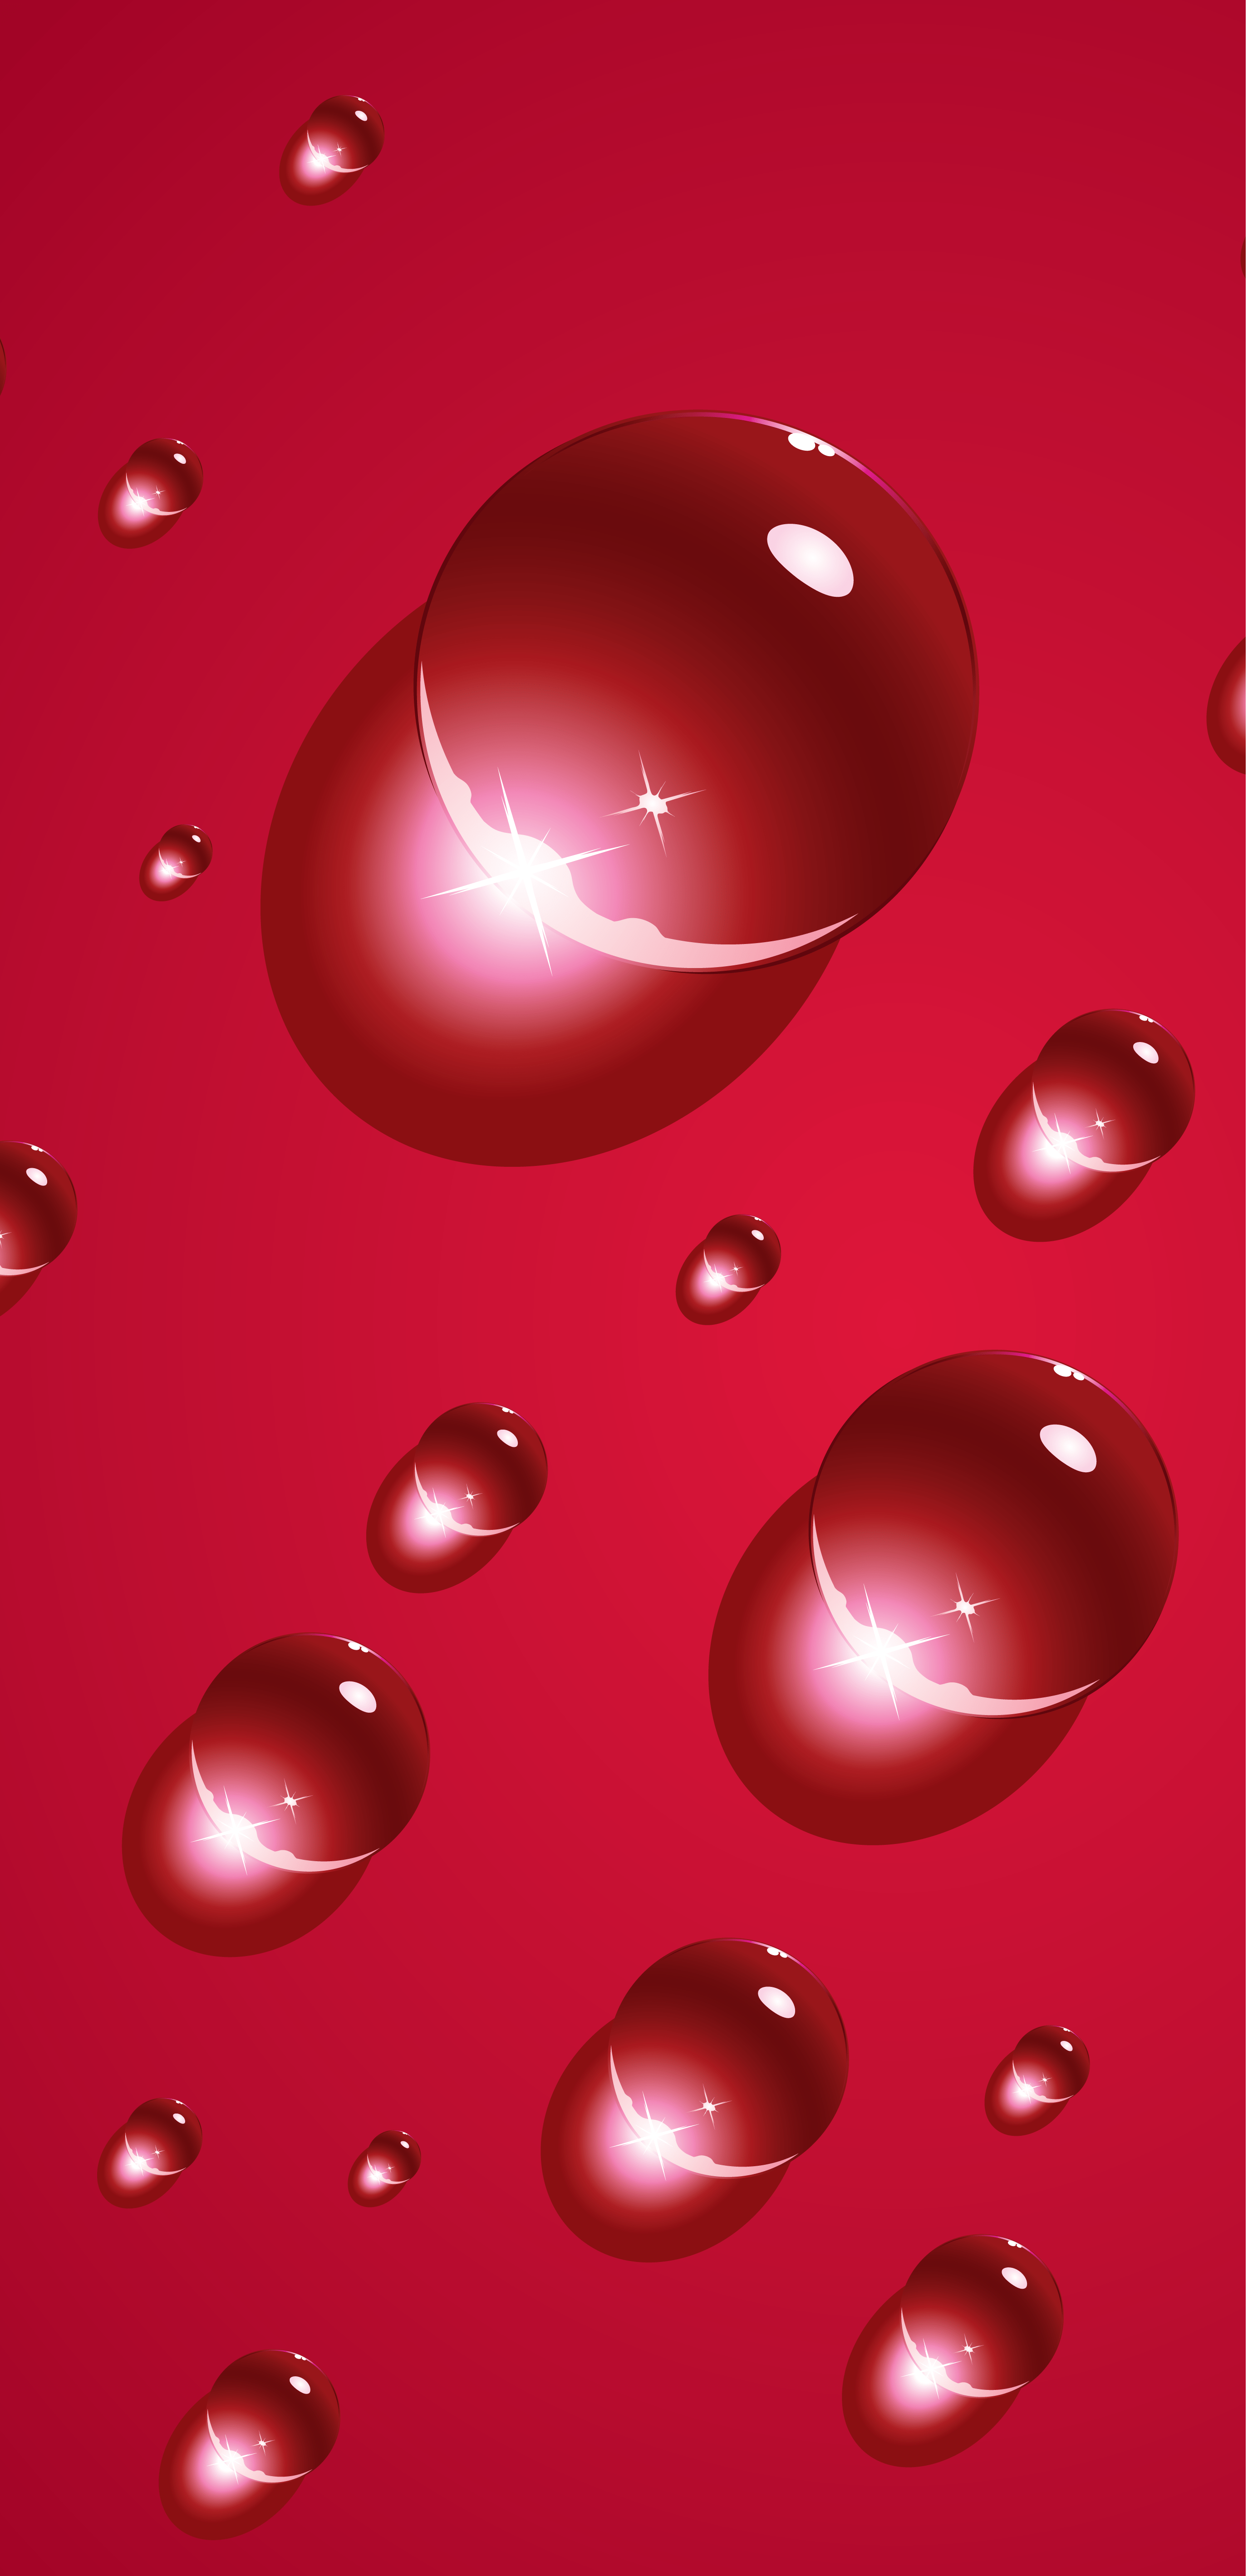 A red image with water droplets. - Water